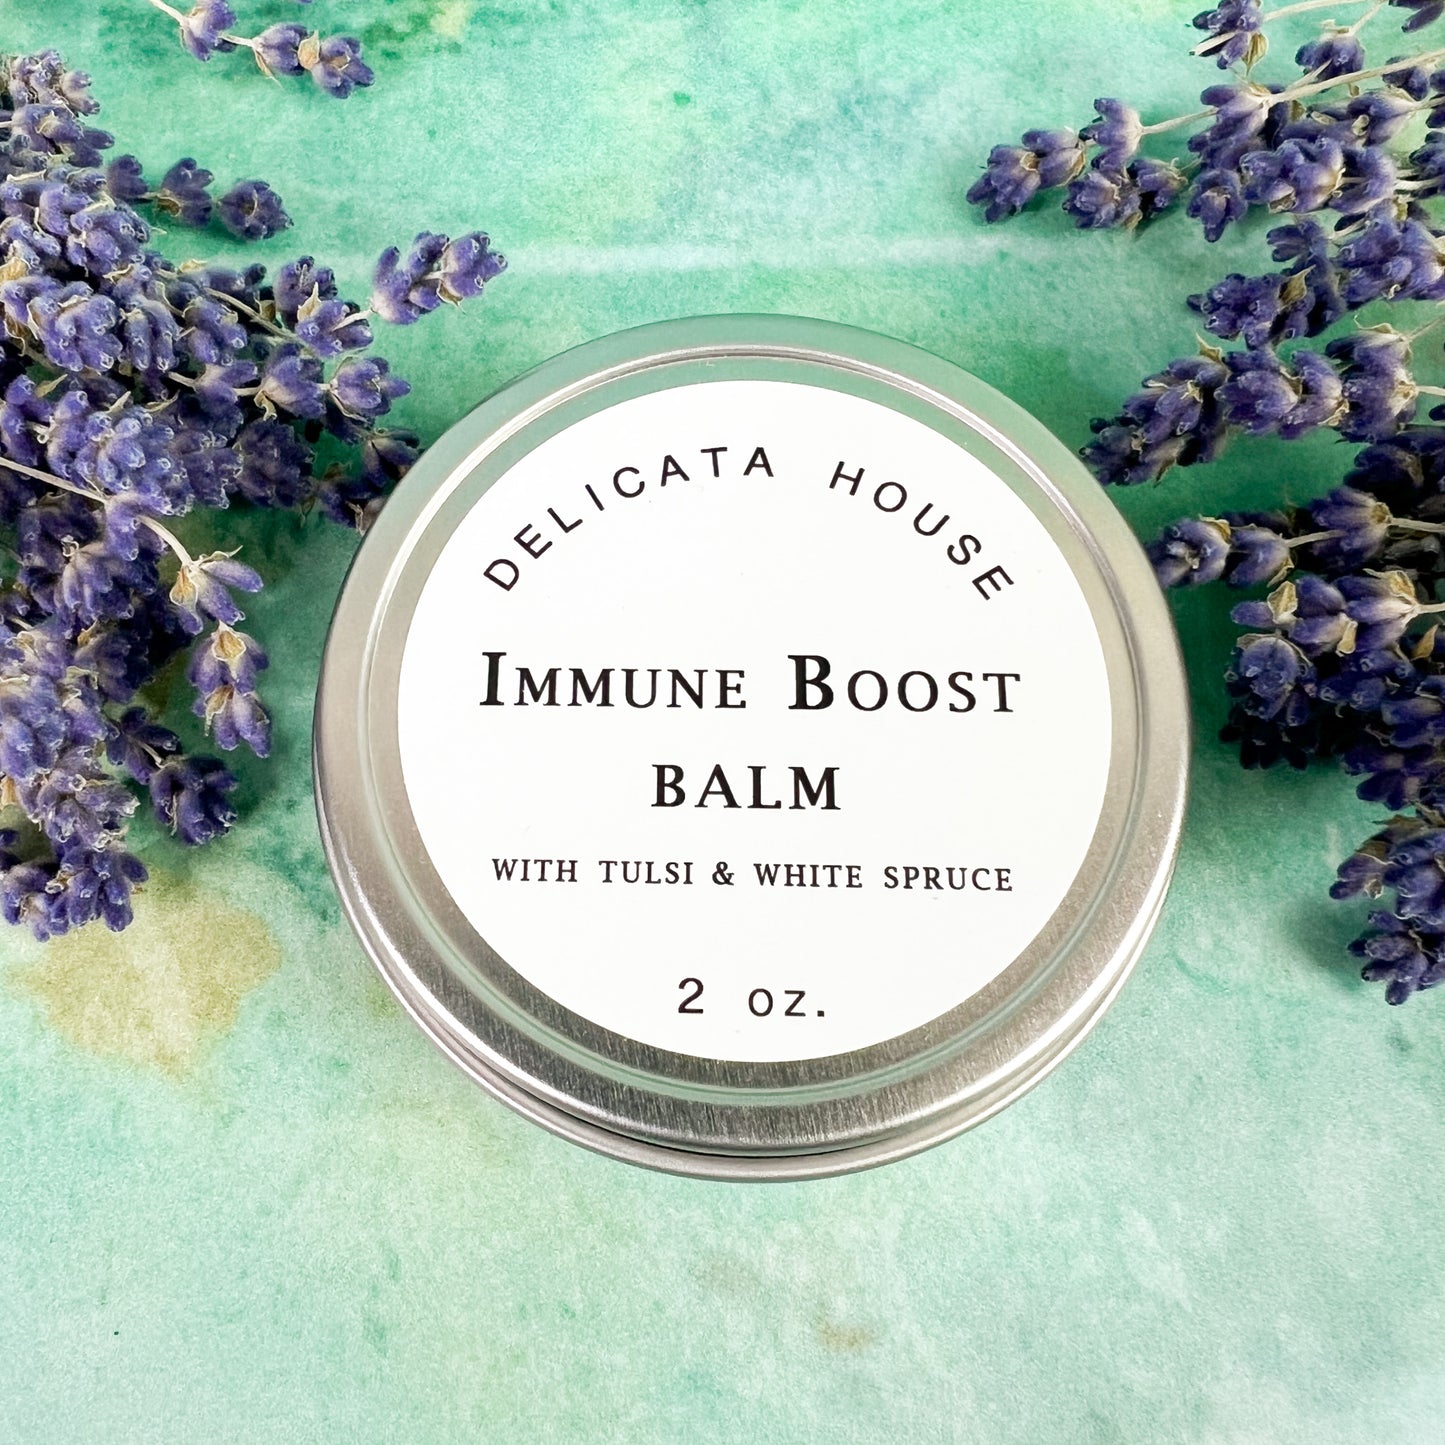 Balm / Immune Boost Balm with Tulsi and White Spruce / Aromatherapy Immune Support Balm / Wellness Balm / Herbal Immune Support Balm